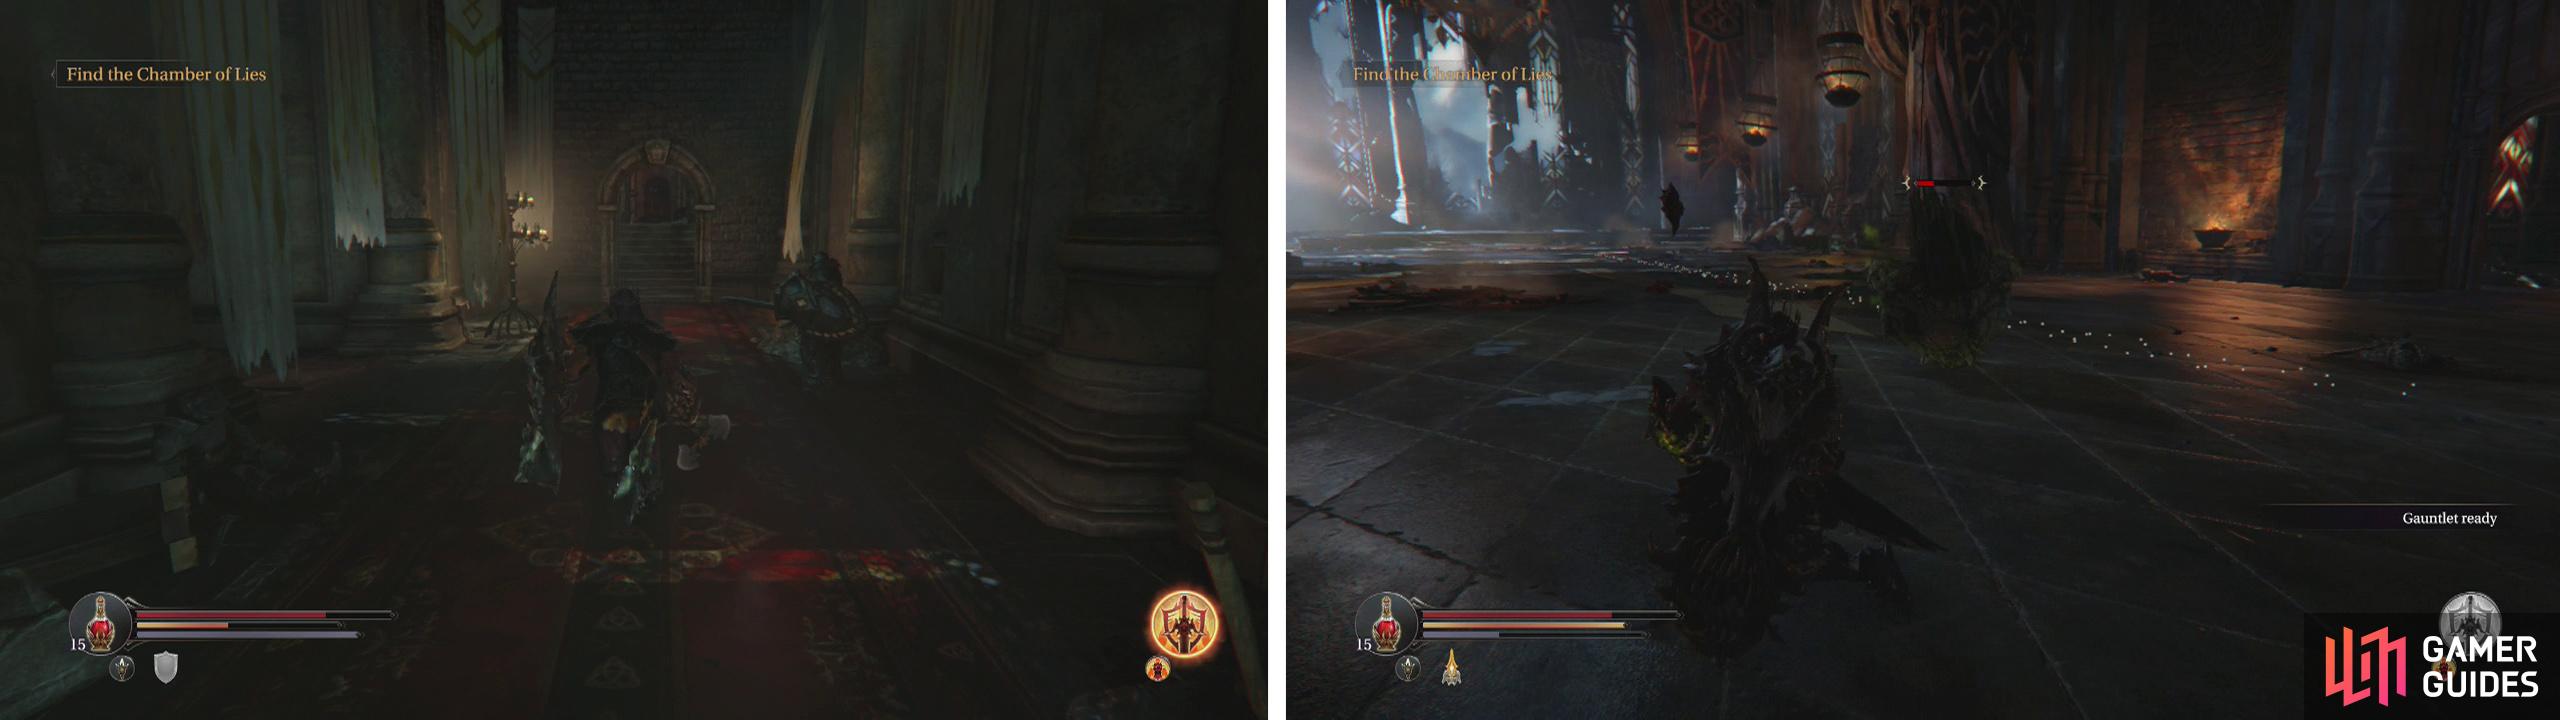 Speak with the guard in the Main Hall (left) and then enter the Initiation Room to fight the Poison Beast (right).